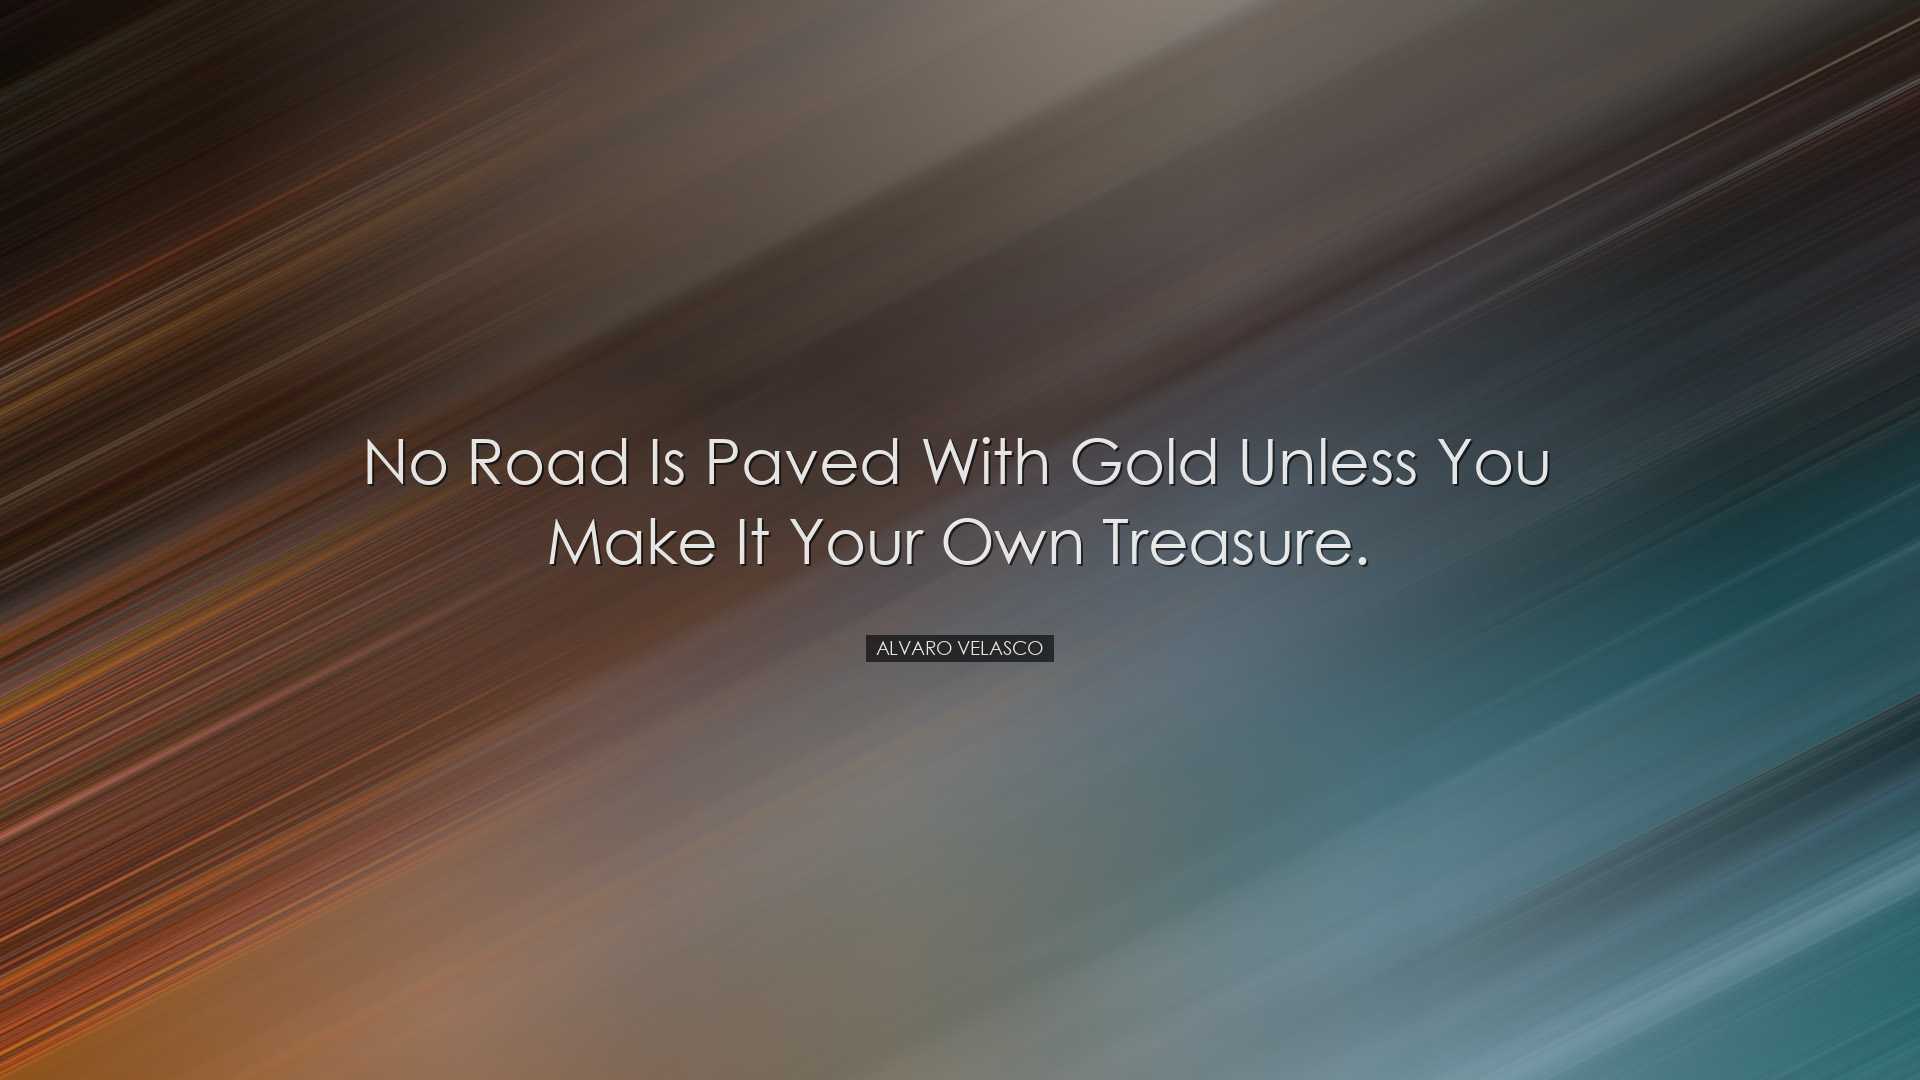 No road is paved with gold unless you make it your own treasure. -